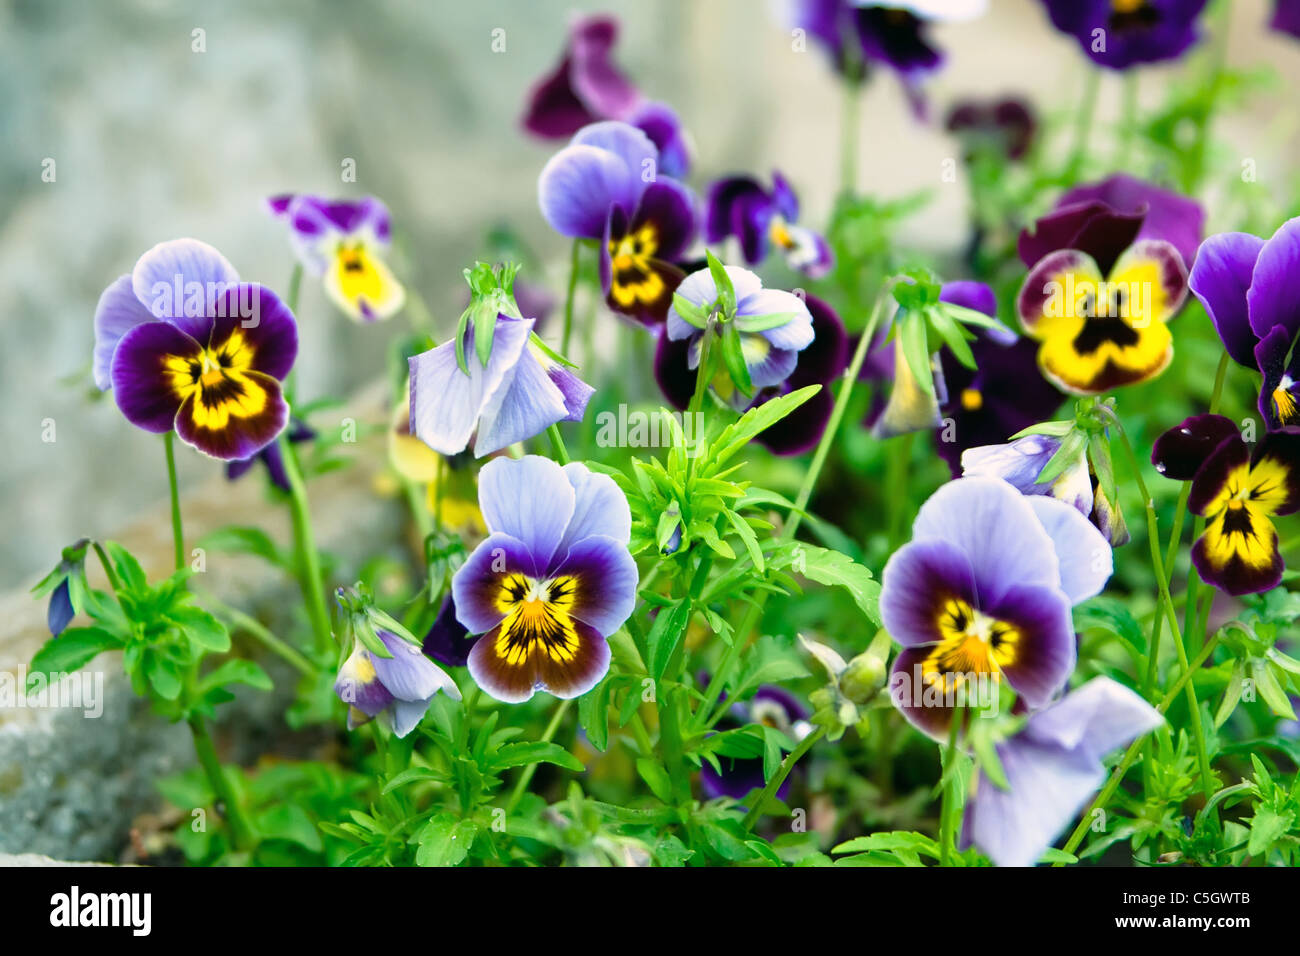 viola tricolor flowers with green leaves Stock Photo